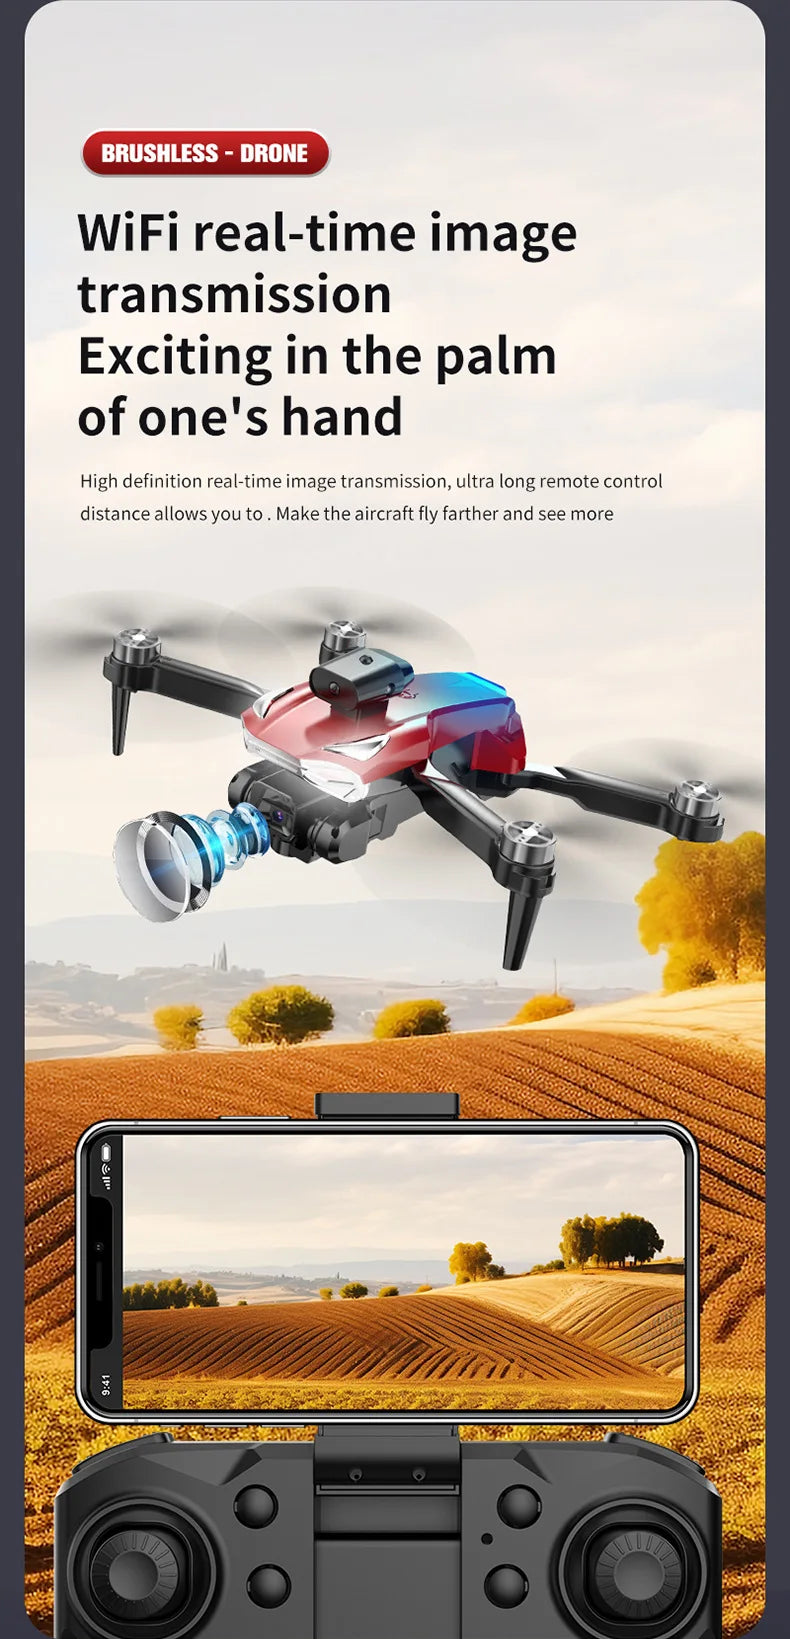 S178 L818 Drone, drone wifi real-time image transmission exciting in the palm of one'